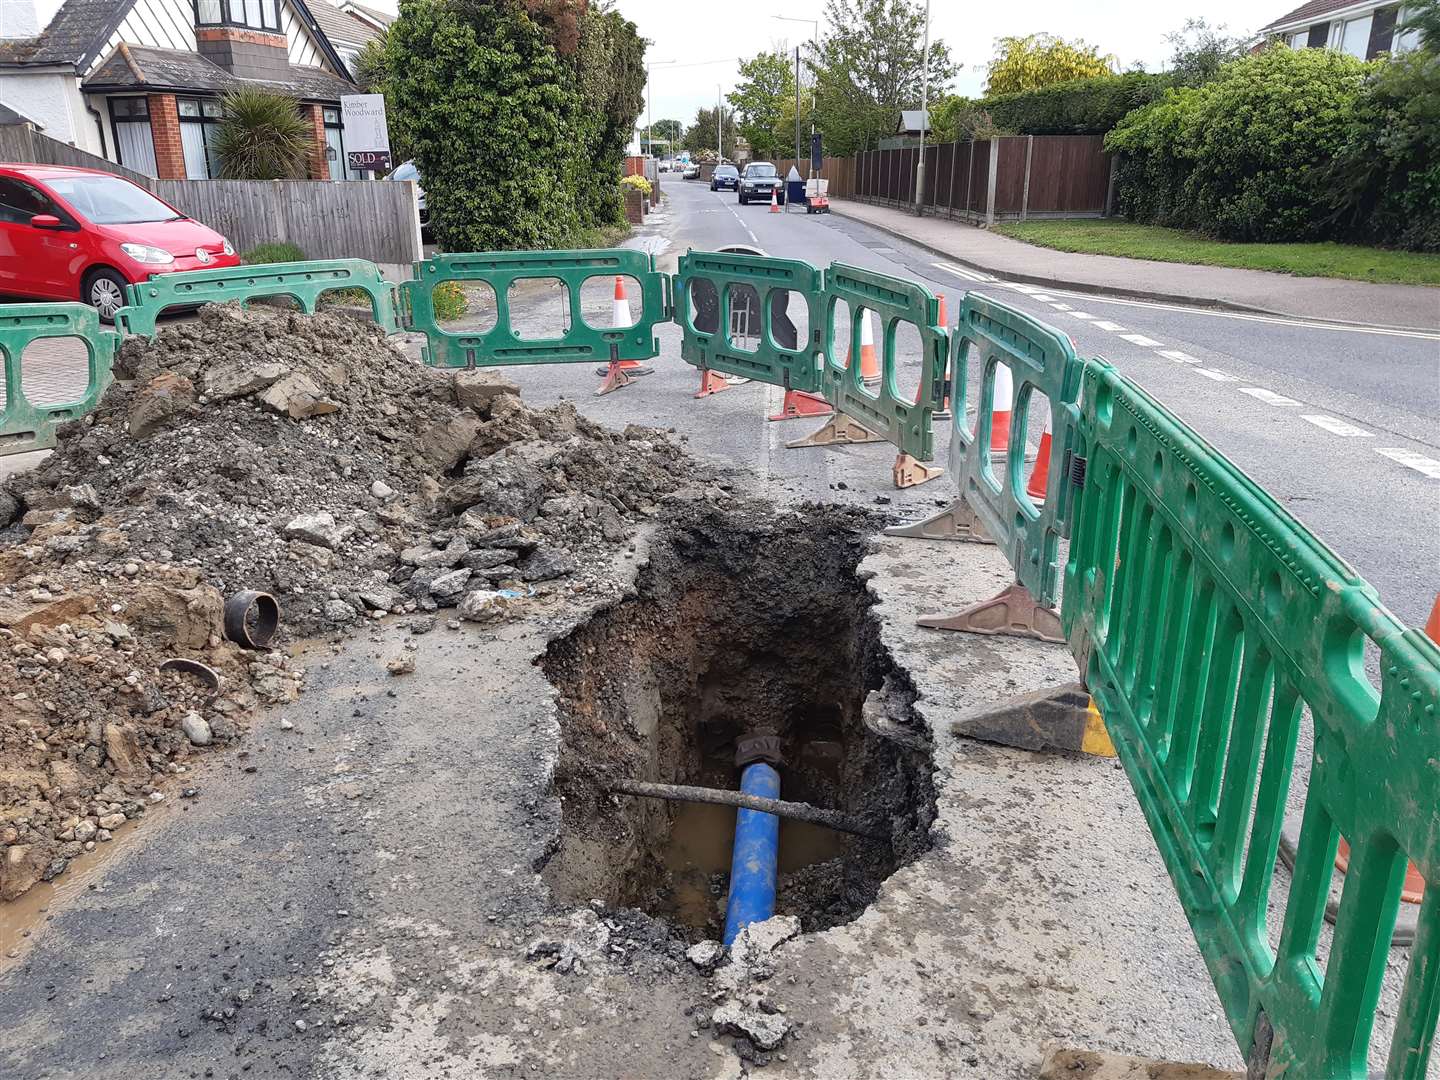 The first burst main in Herne Bay occurred on May 2